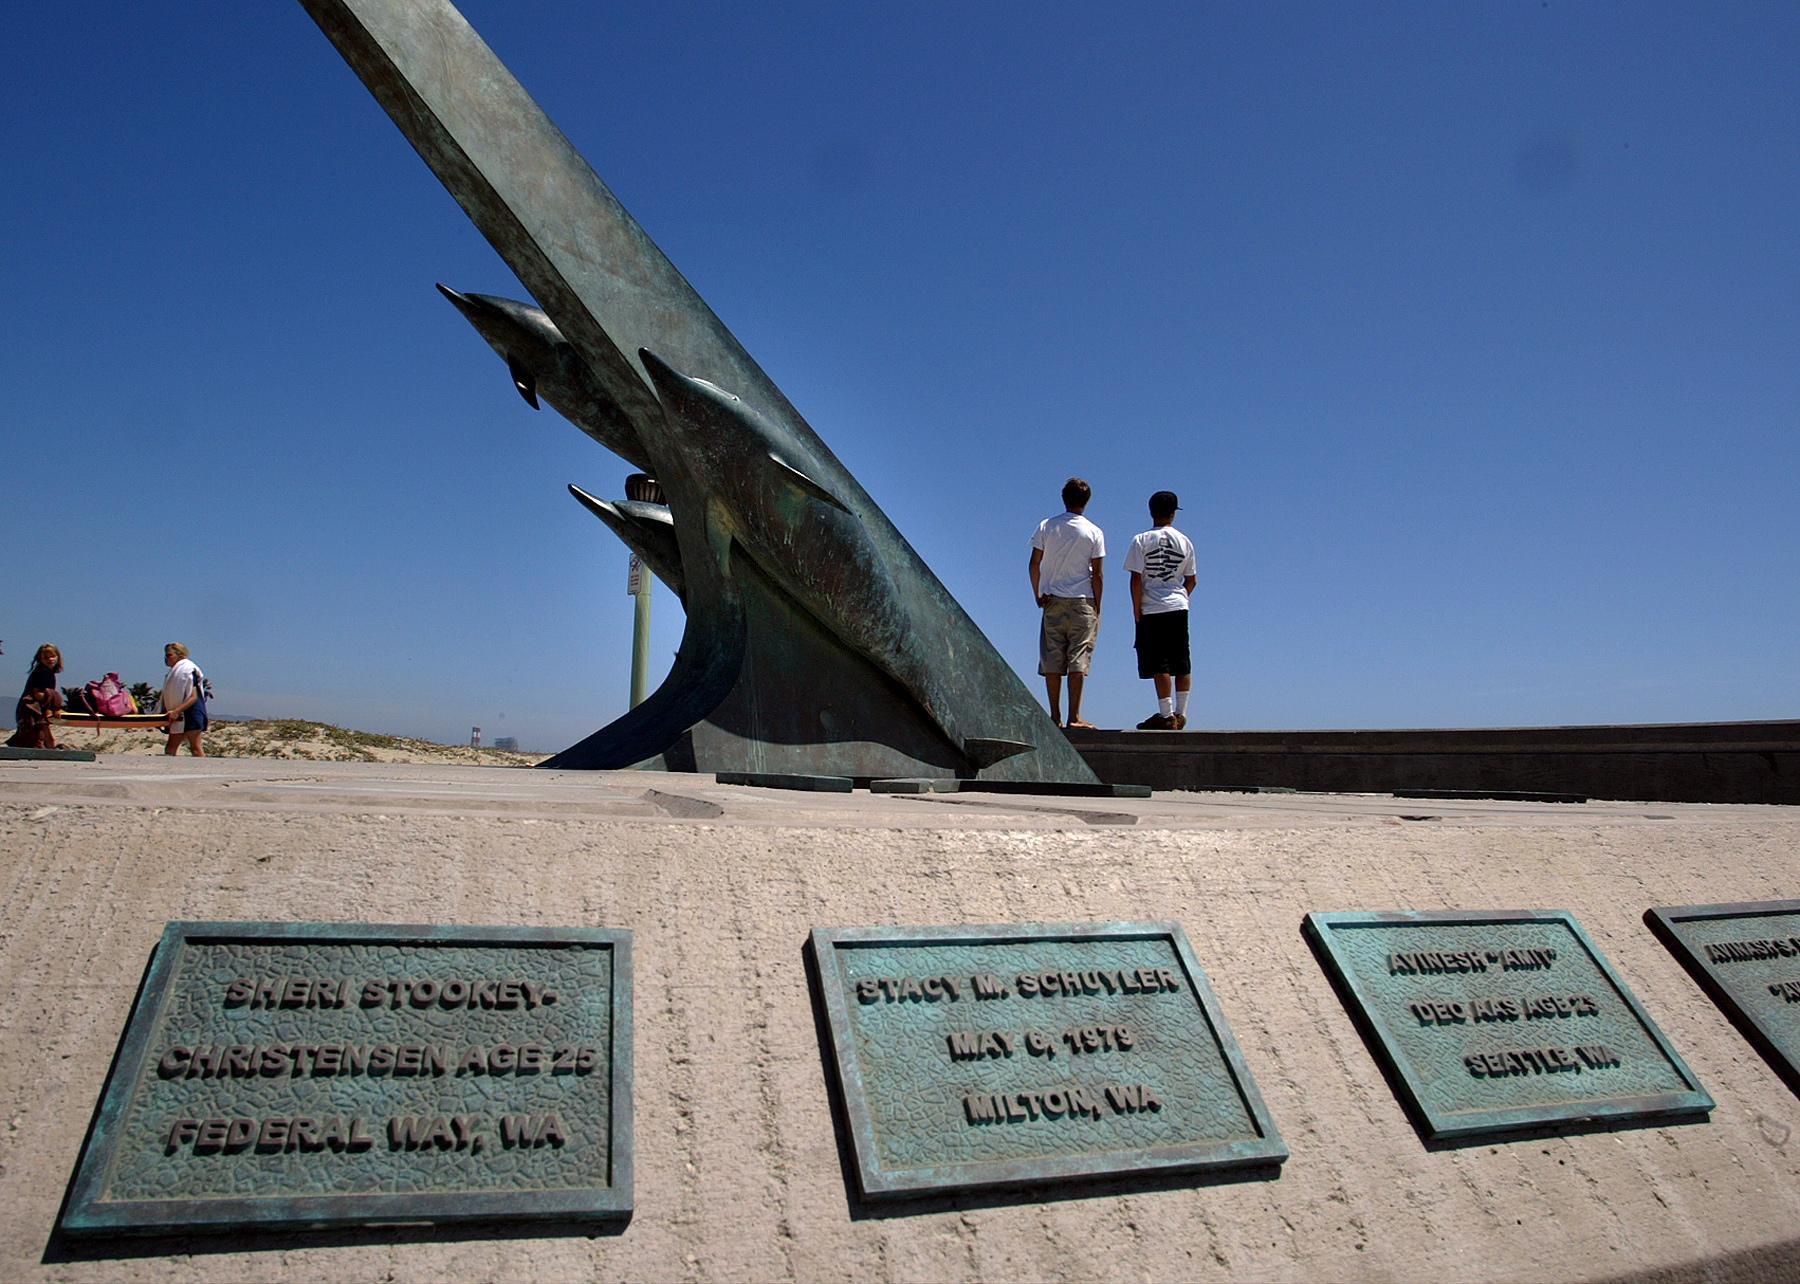 Alaska Airlines memorial at beach in Port Hueneme on Tuesday, August 12, 2003. | Source: Getty Images